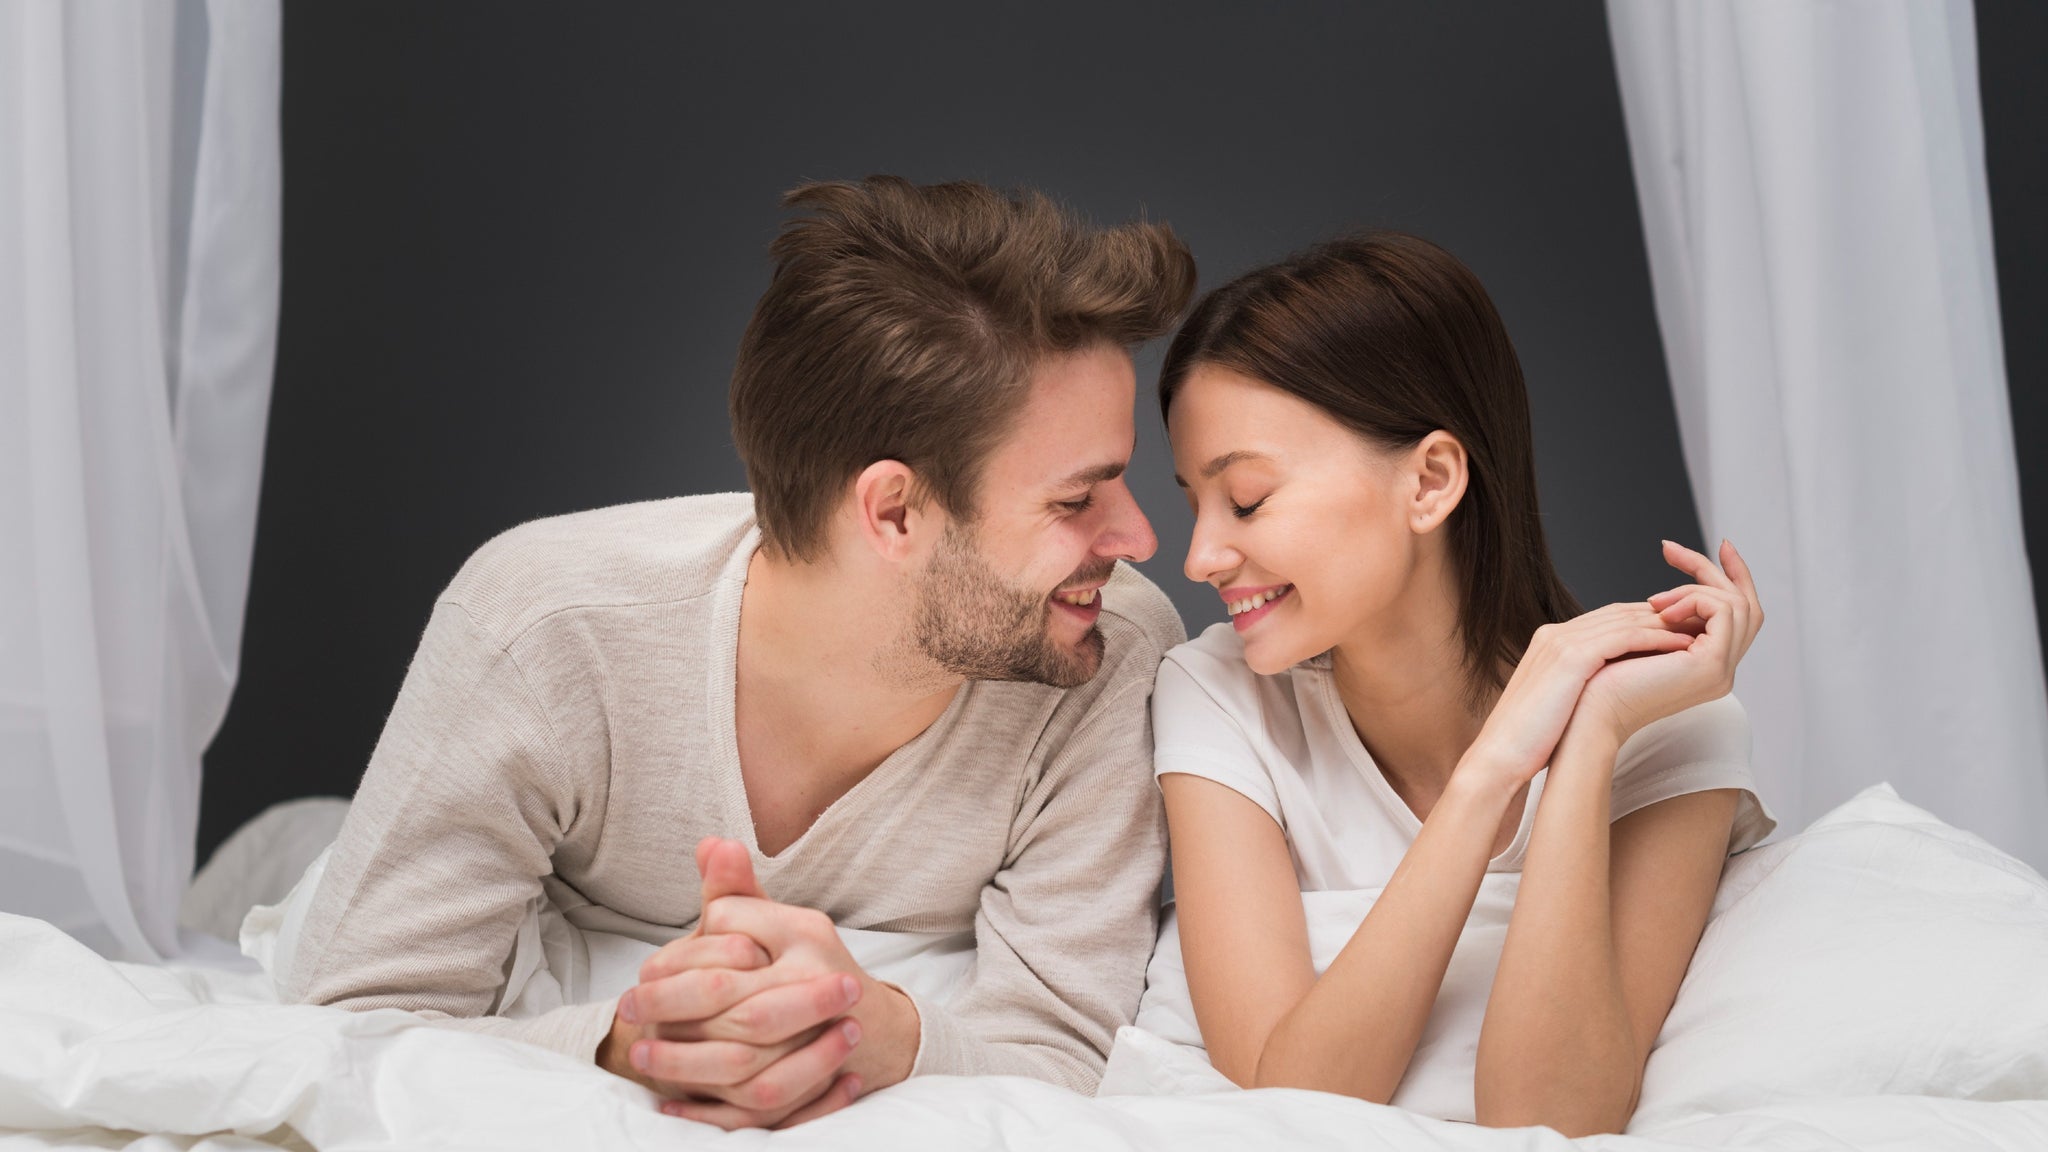 The Role of Sex in Romantic Relationships